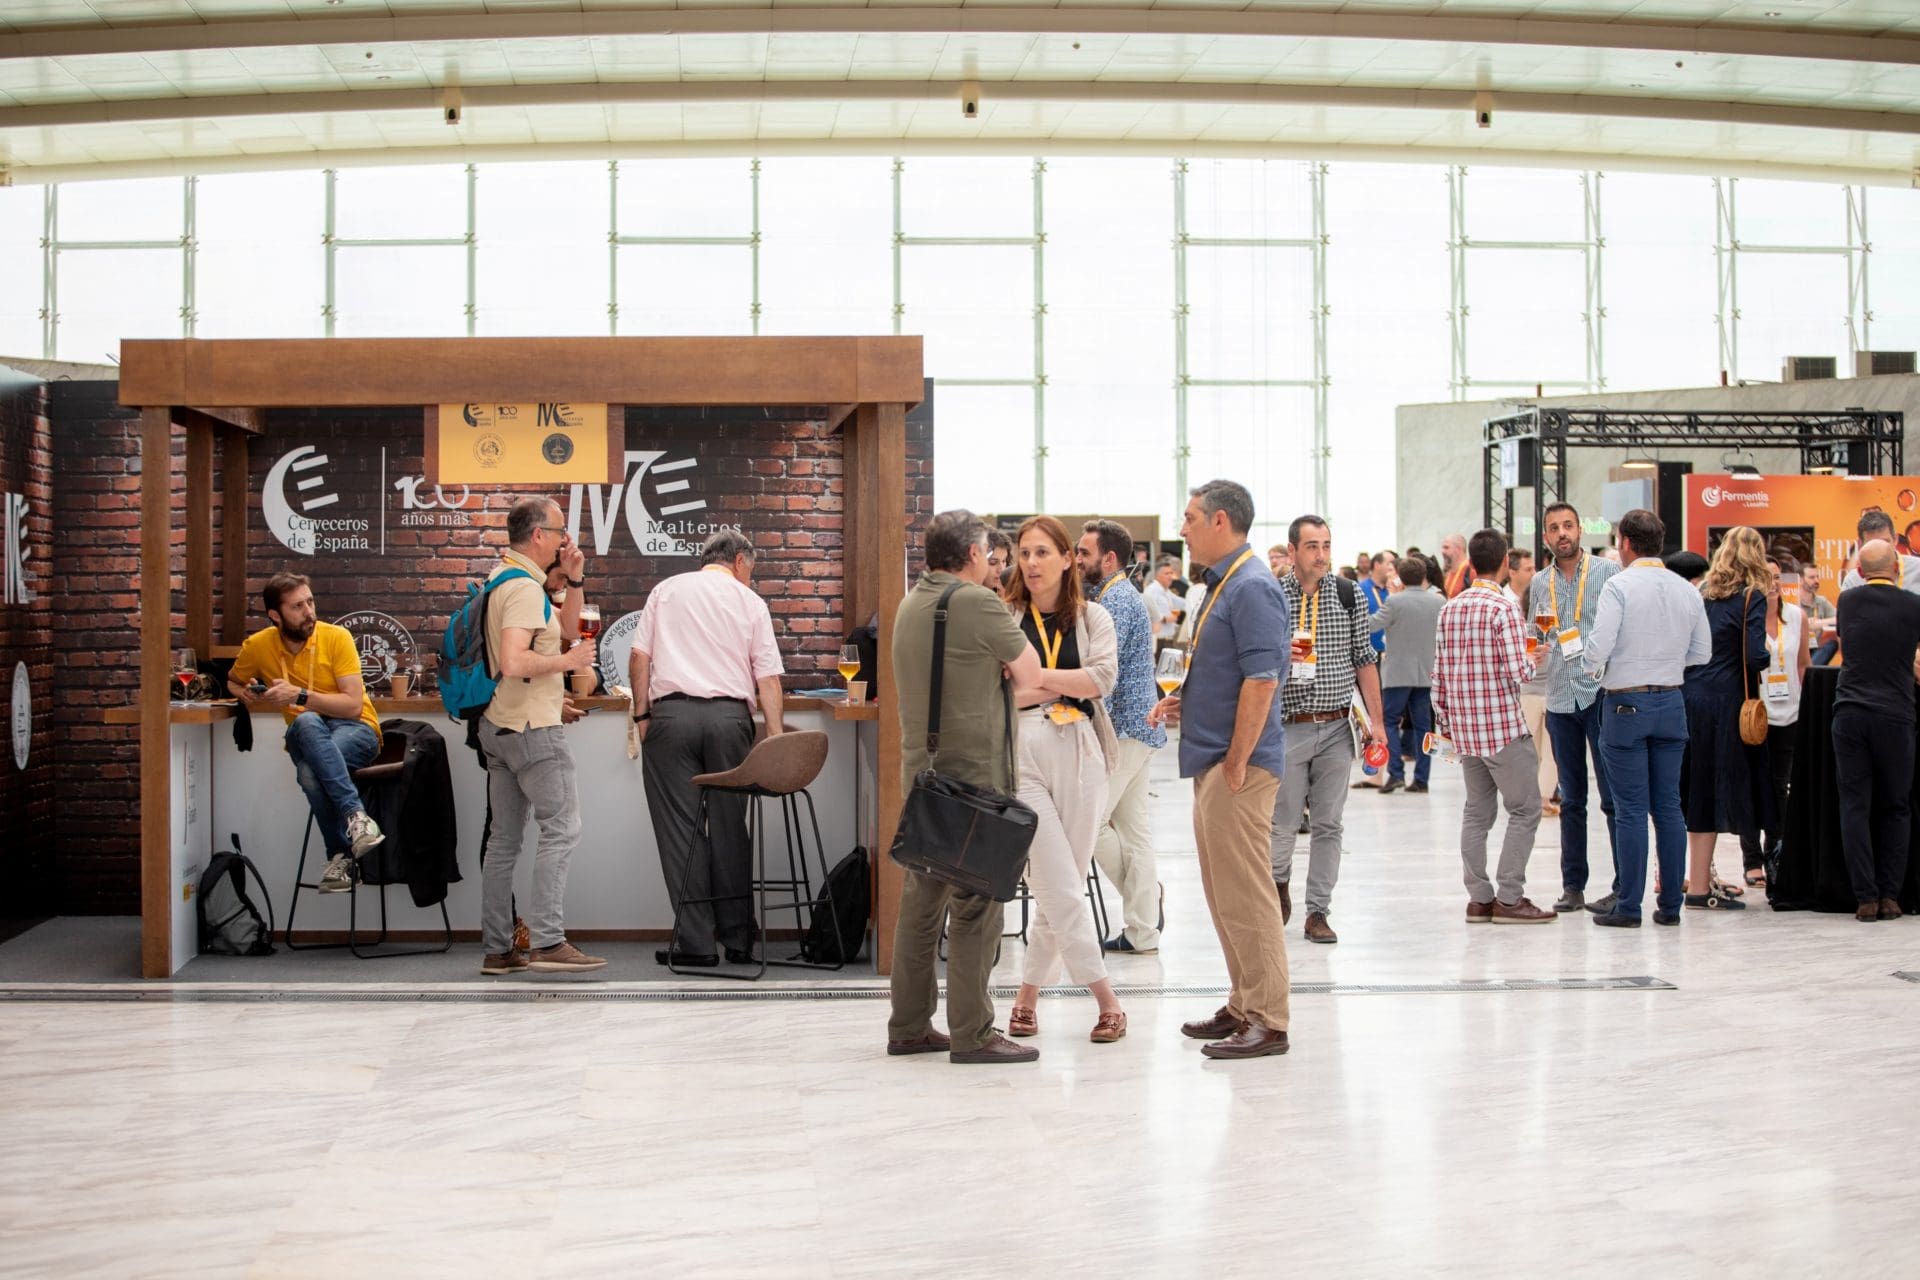 The Brewers Forum - exhibition / trade show